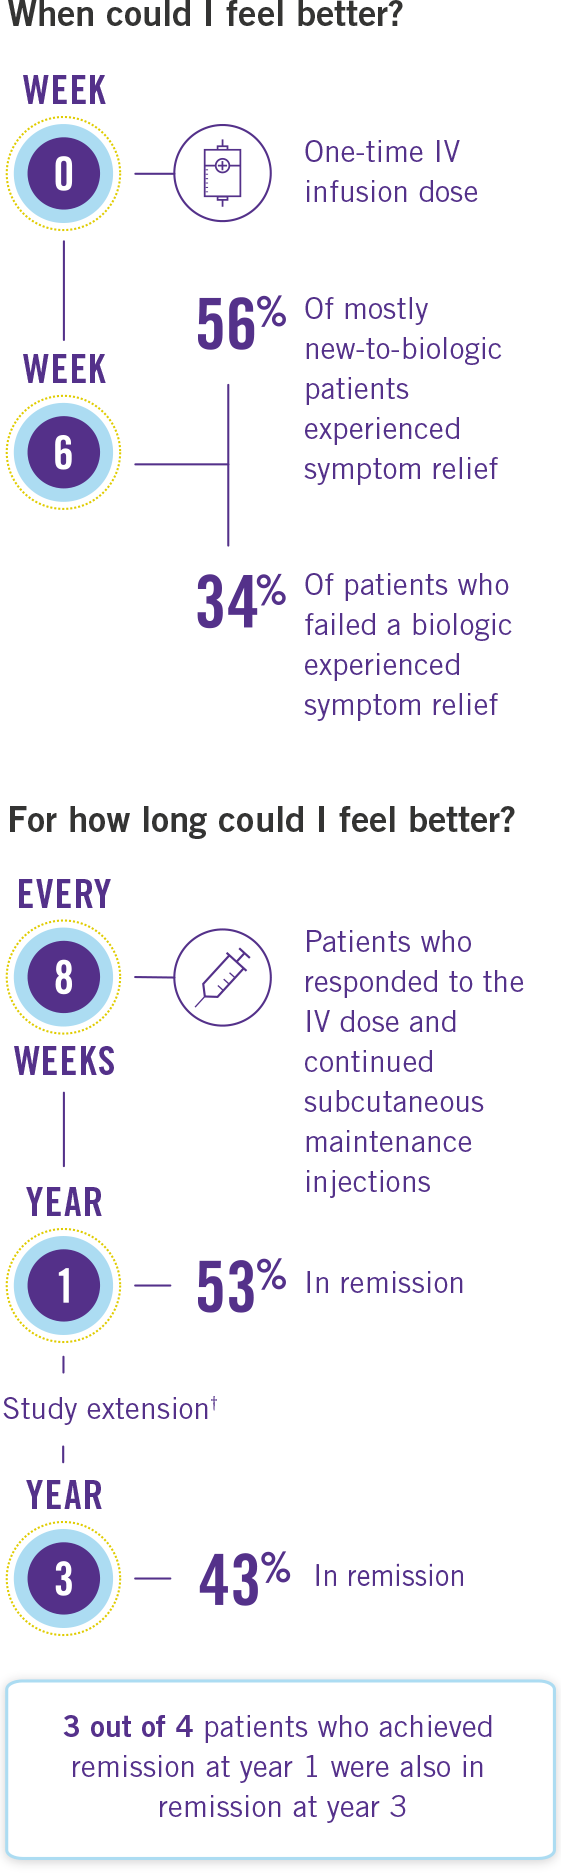 Relief from CD symptoms after intravenous (IV) infusion and subcutaneous maintenance injections data